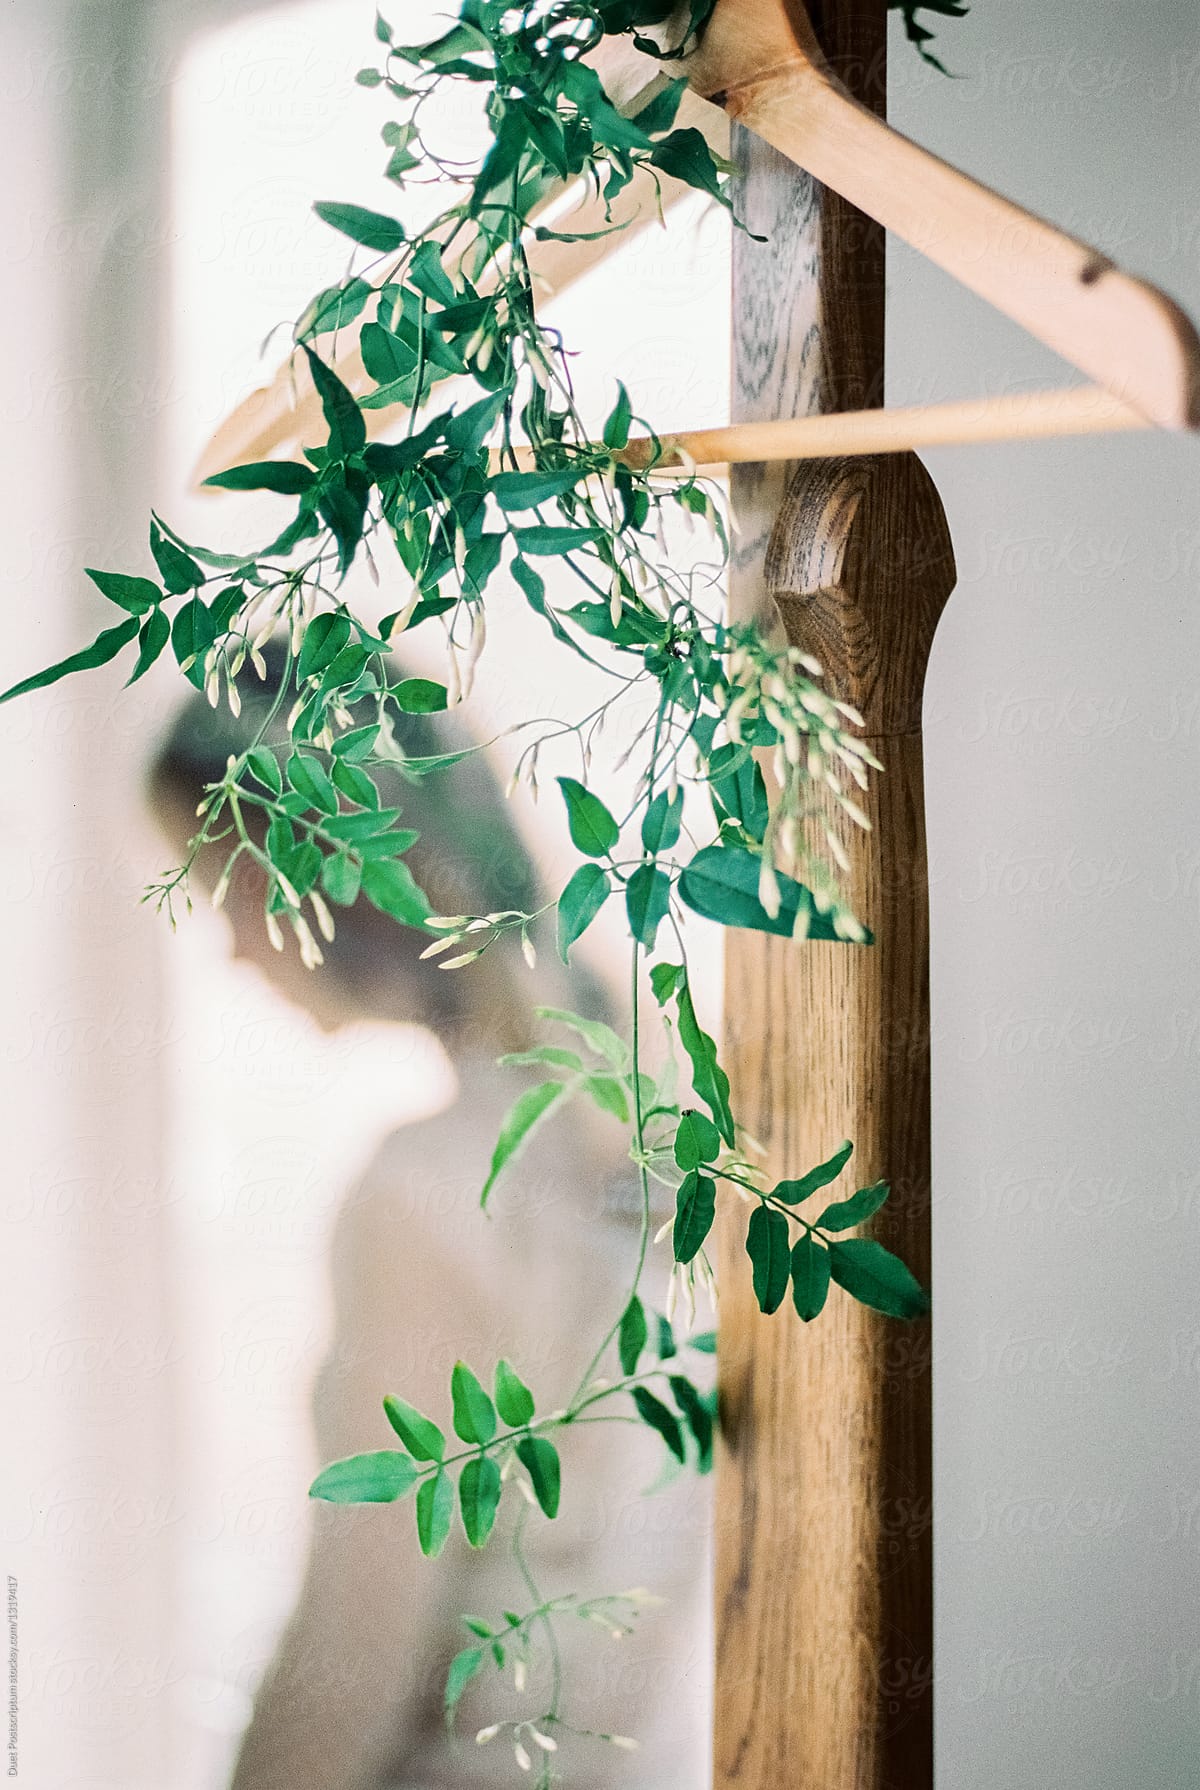 Green branch with leaves hanging on hanger